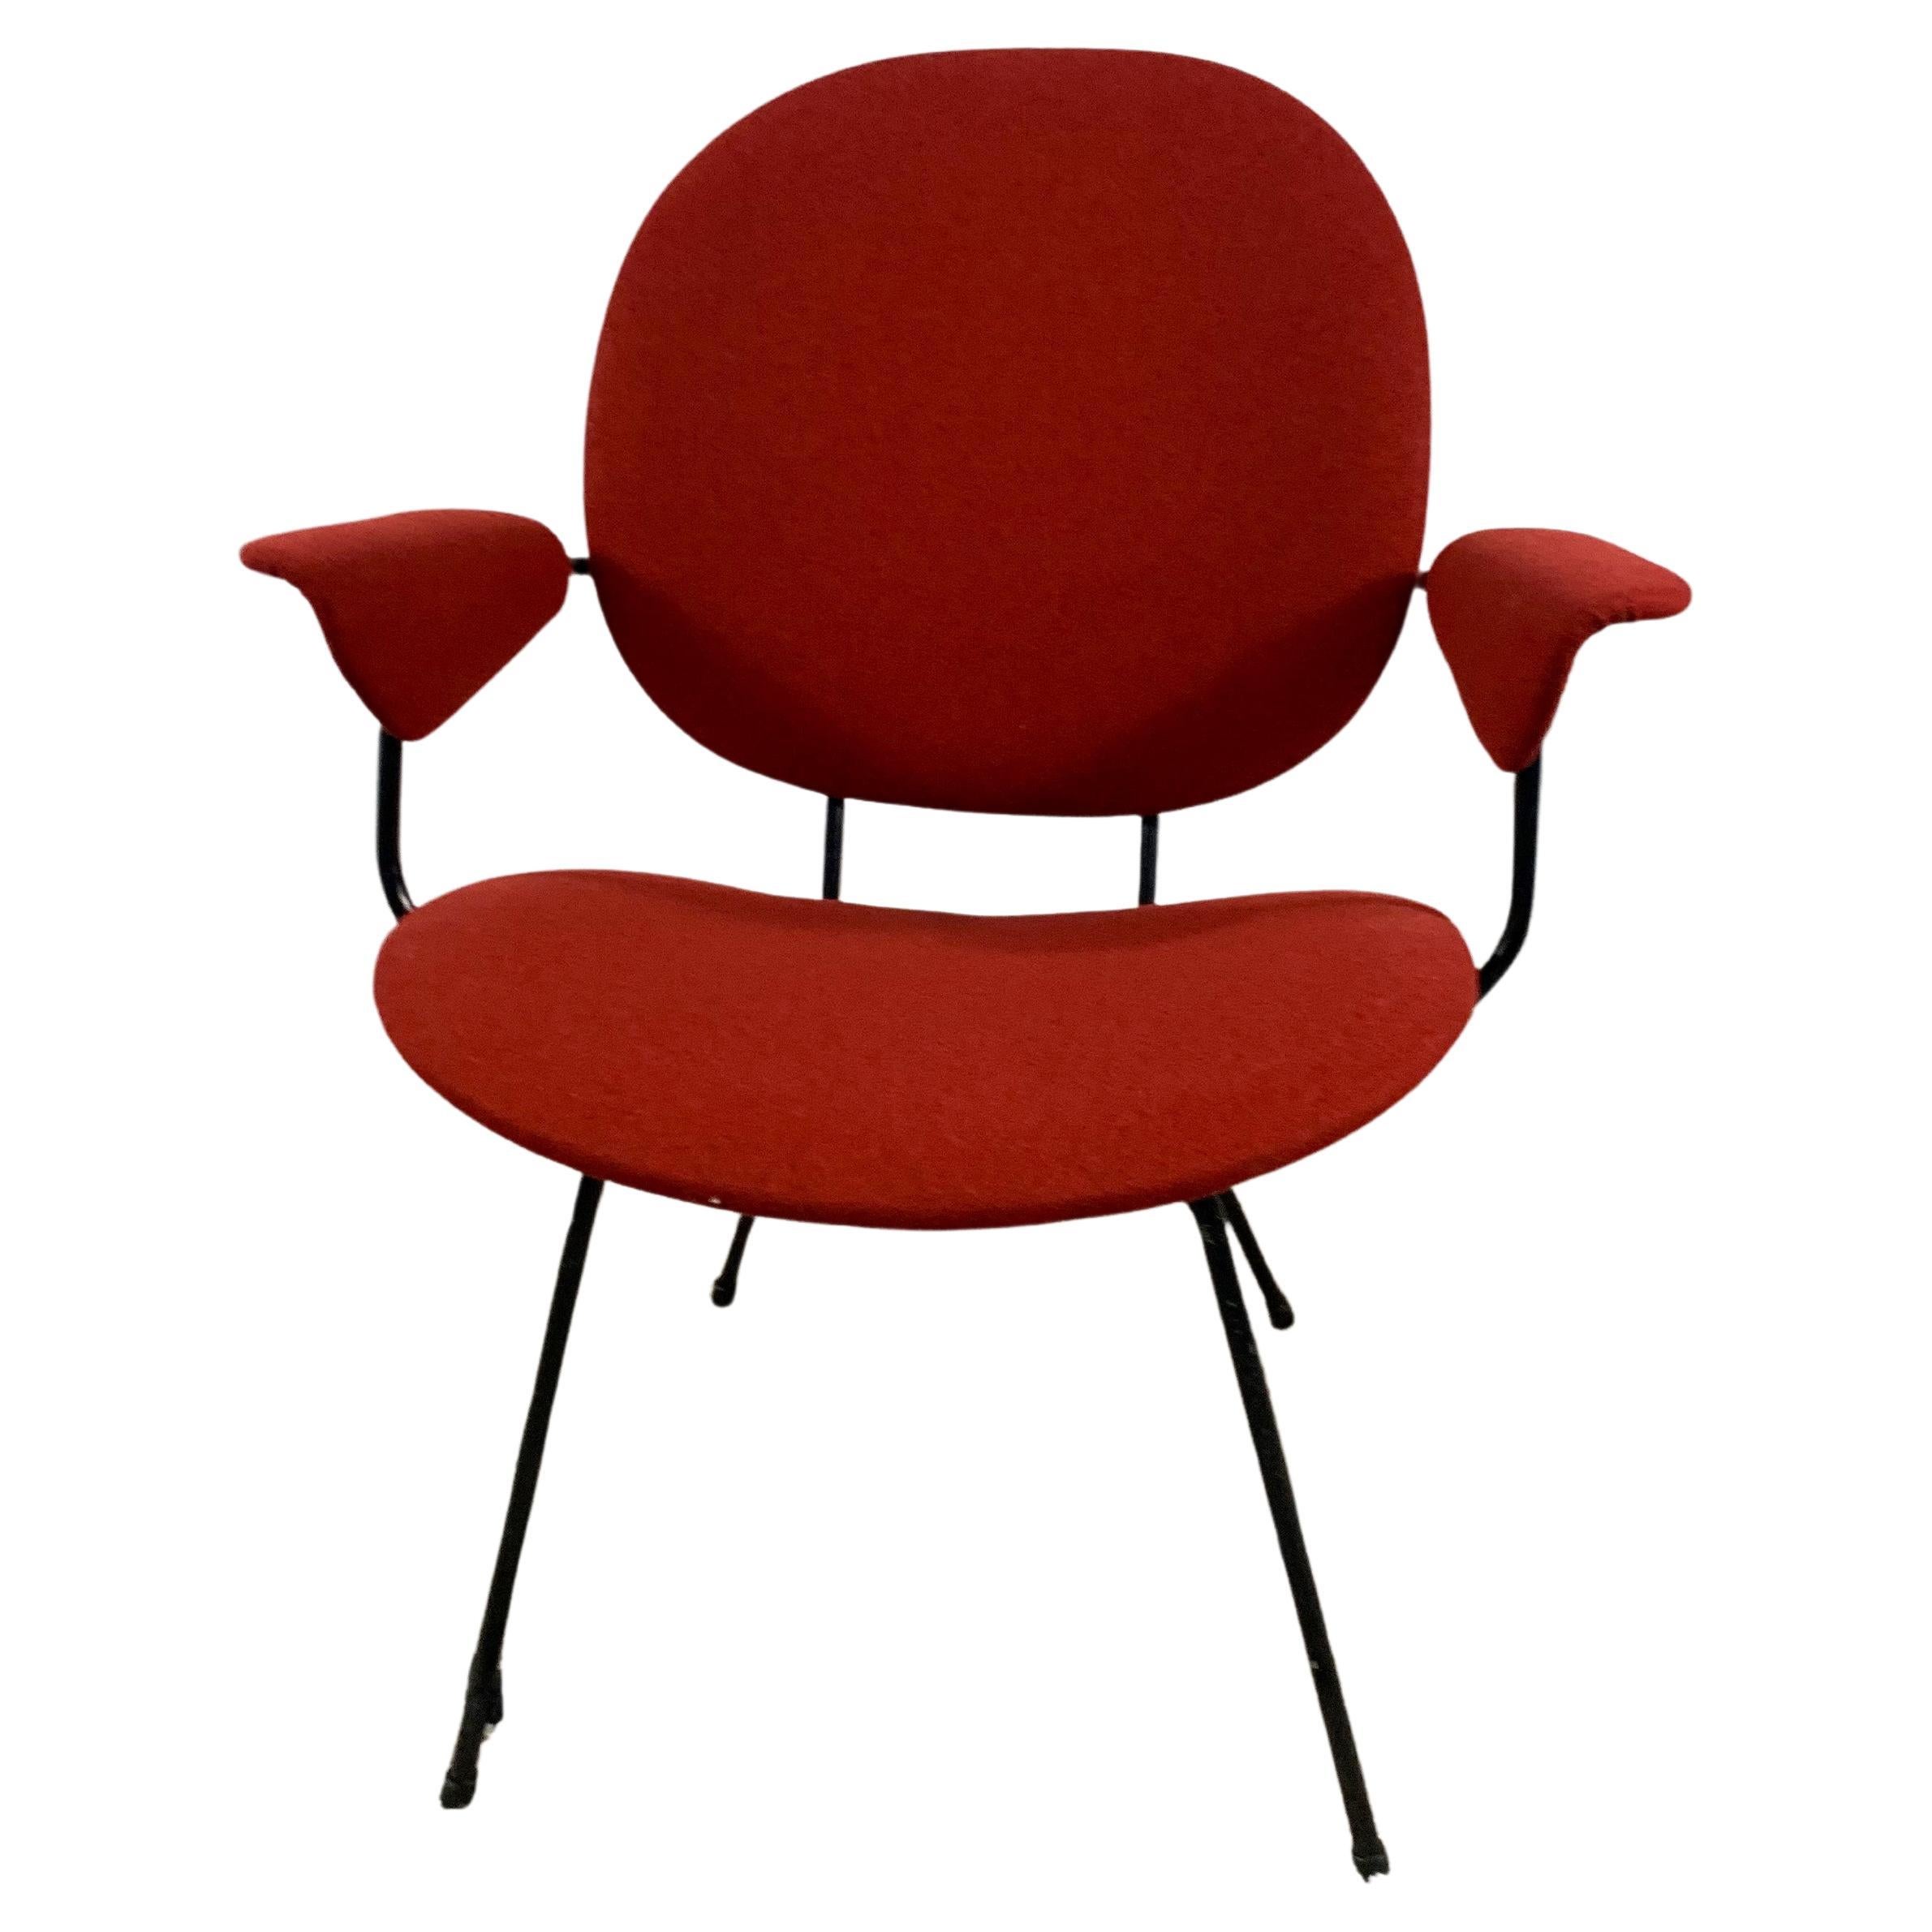 Chair Designed By W.H.Gispen For The Dutch Company Kembo